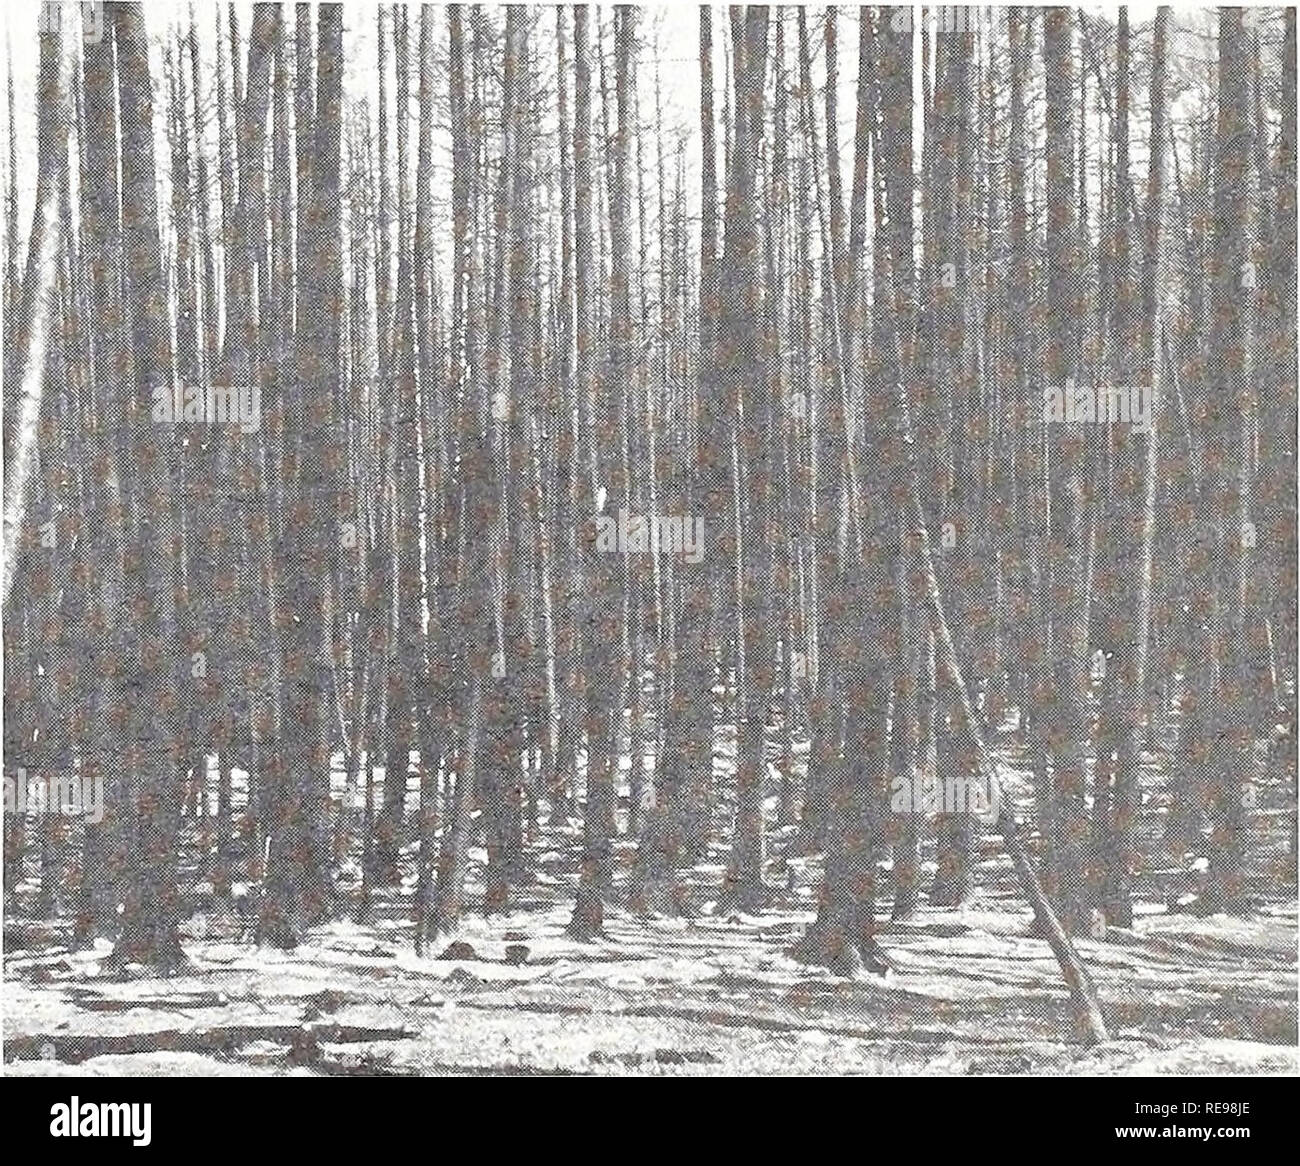 . Early postfire revegetation in a western Montana douglas-fir forest. Revegetation Montana; Reforestation Montana; Wildfires Montana; Douglas fir; Forests and forestry Montana. Table 1.—Comparison of precipitation data from Missoula Airport Station and Pattee Canyon climatological station (source: National Weather Service Climatological Data) Precipitation amount 1976 1977 1978 Missoula Pattee Missoula Pattee Missoula Pattee Month Airport Canyon Airport Canyon Airport Canyon Inches (millimeters)- Jan. 0.90 1.03 0.66 0.80 1.15 1.46 (22.9) (26.2) (16.8) (20.3) (29.2) (37.1) Feb. 1.04 1.47 .18 . Stock Photo